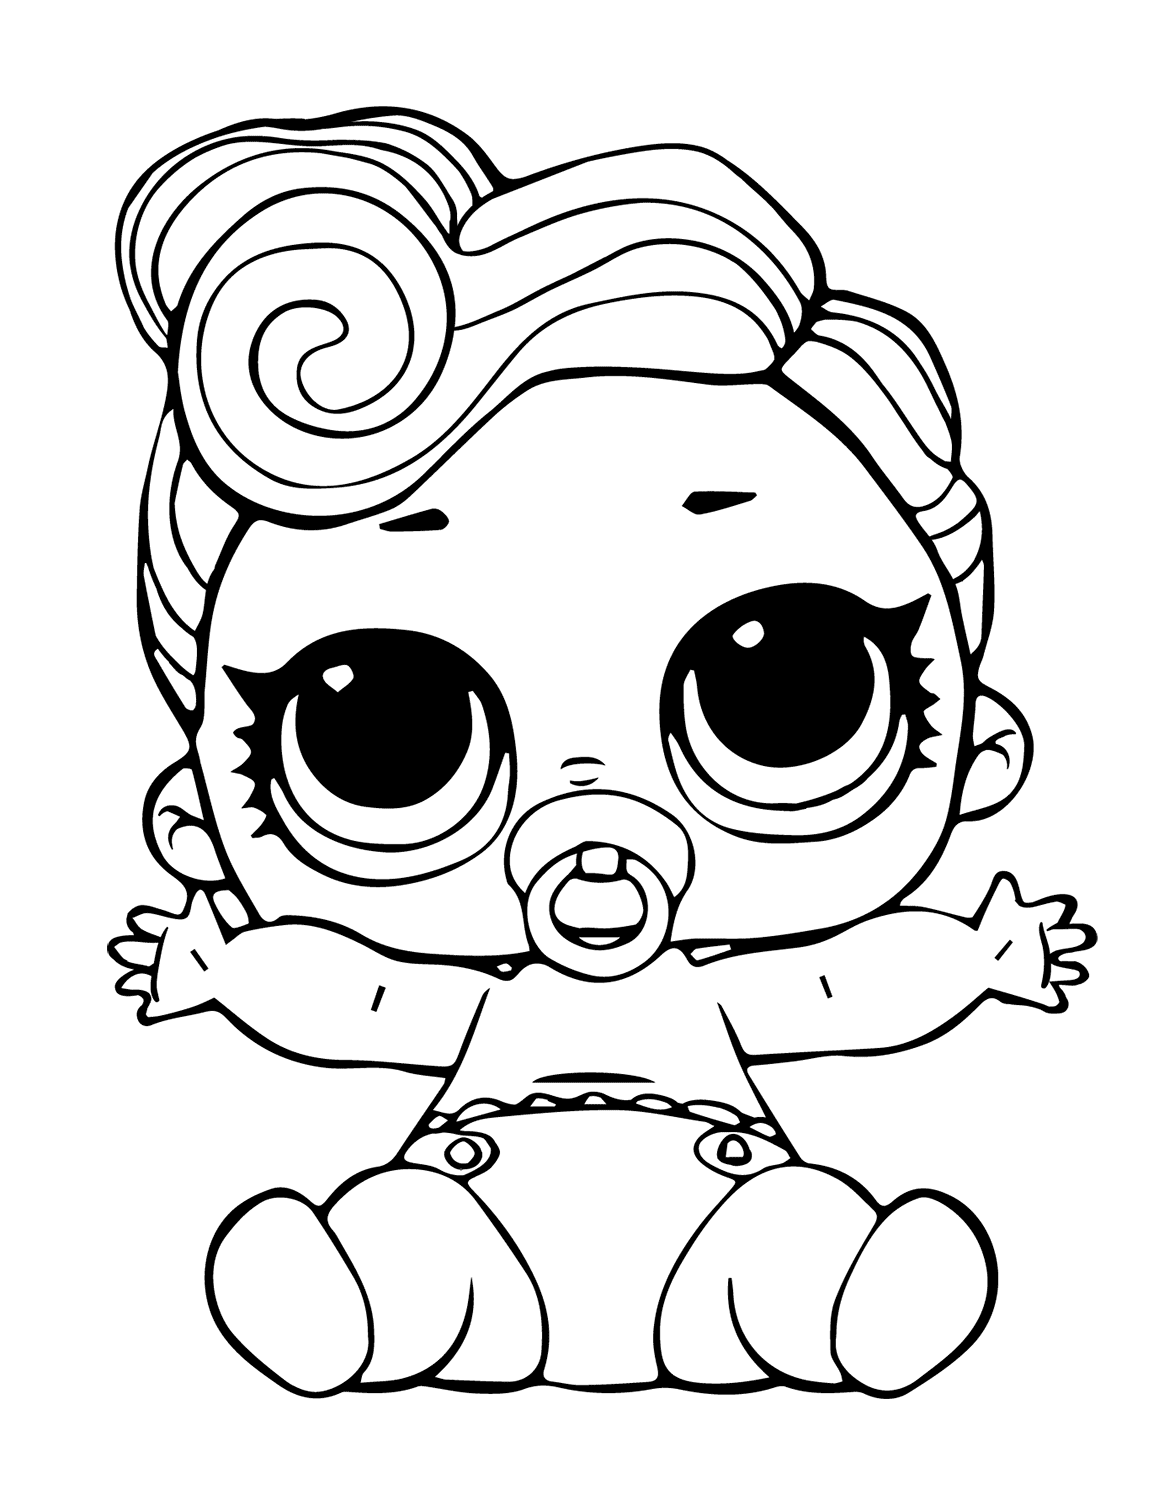 The Lil Queen Lol Doll Coloring Page   Free Printable Coloring Pages ...